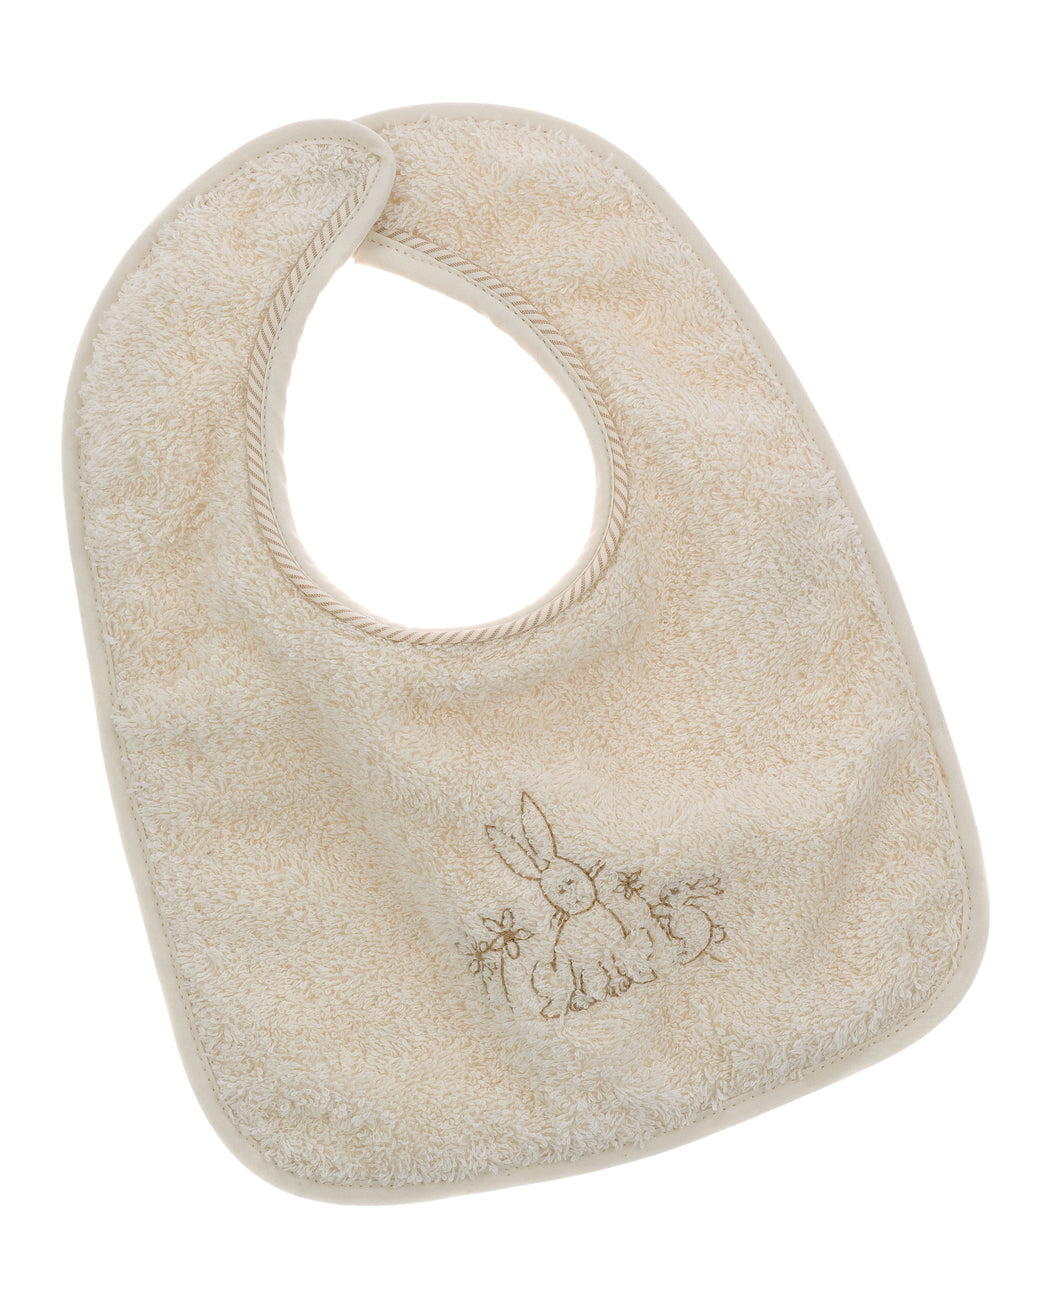 Bavetta prima pappa NaturaPura/ Terry bib with embroidered bunnies - HOPLA' PARMA Baby Collections